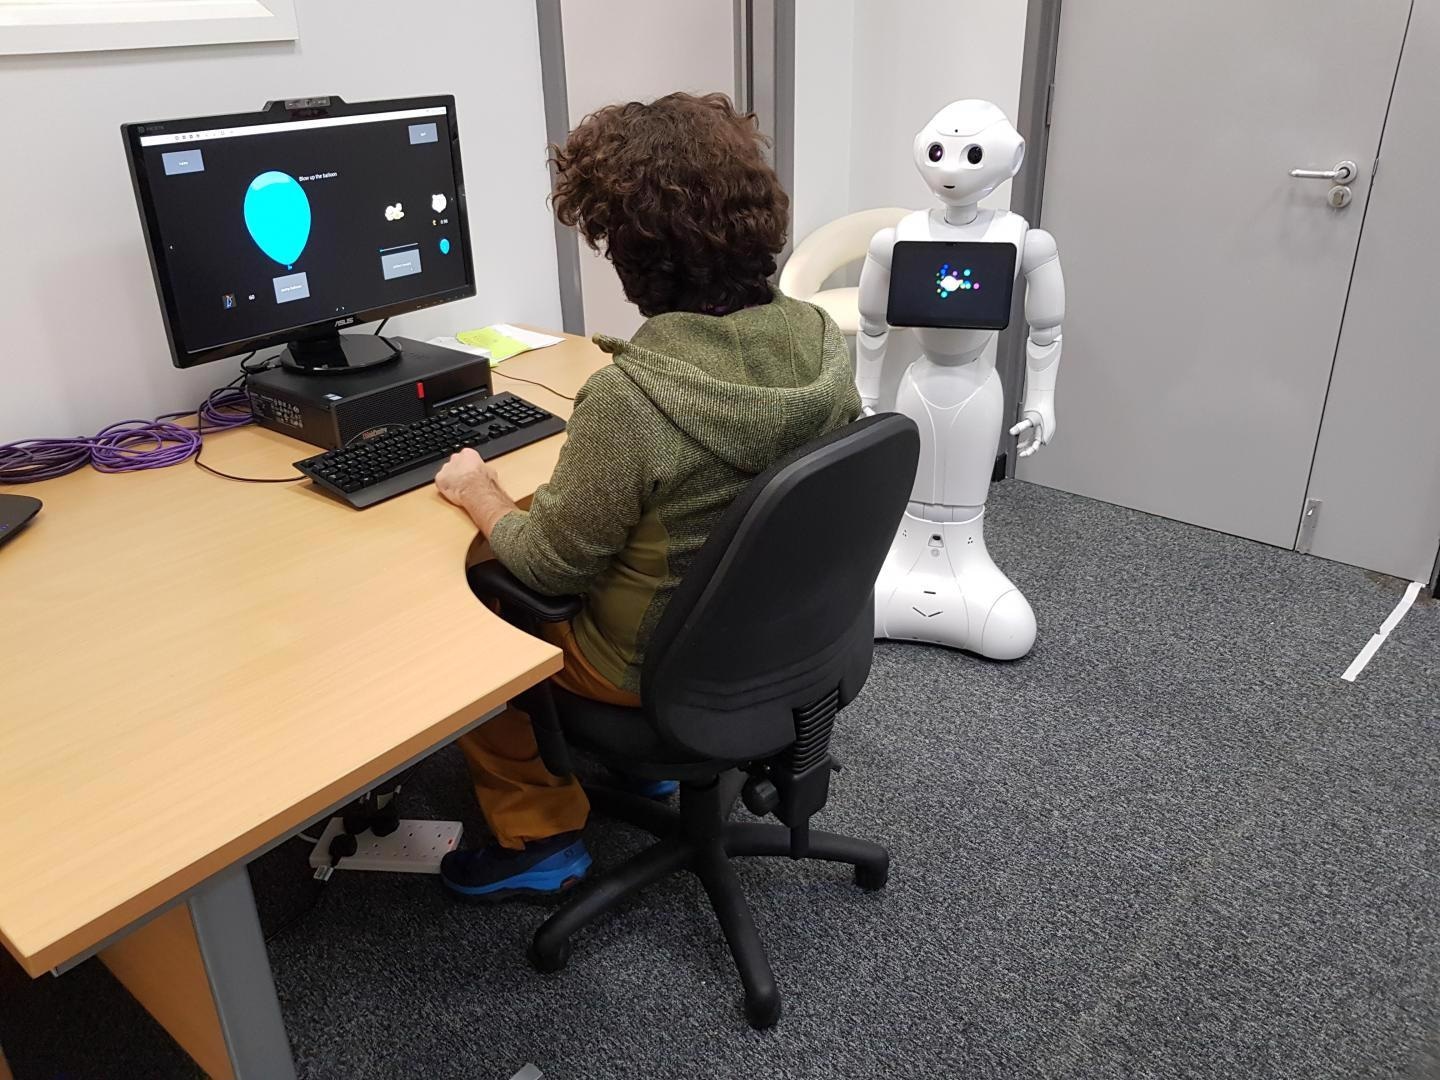 Study: Robots can Inspire Humans to Take Risks